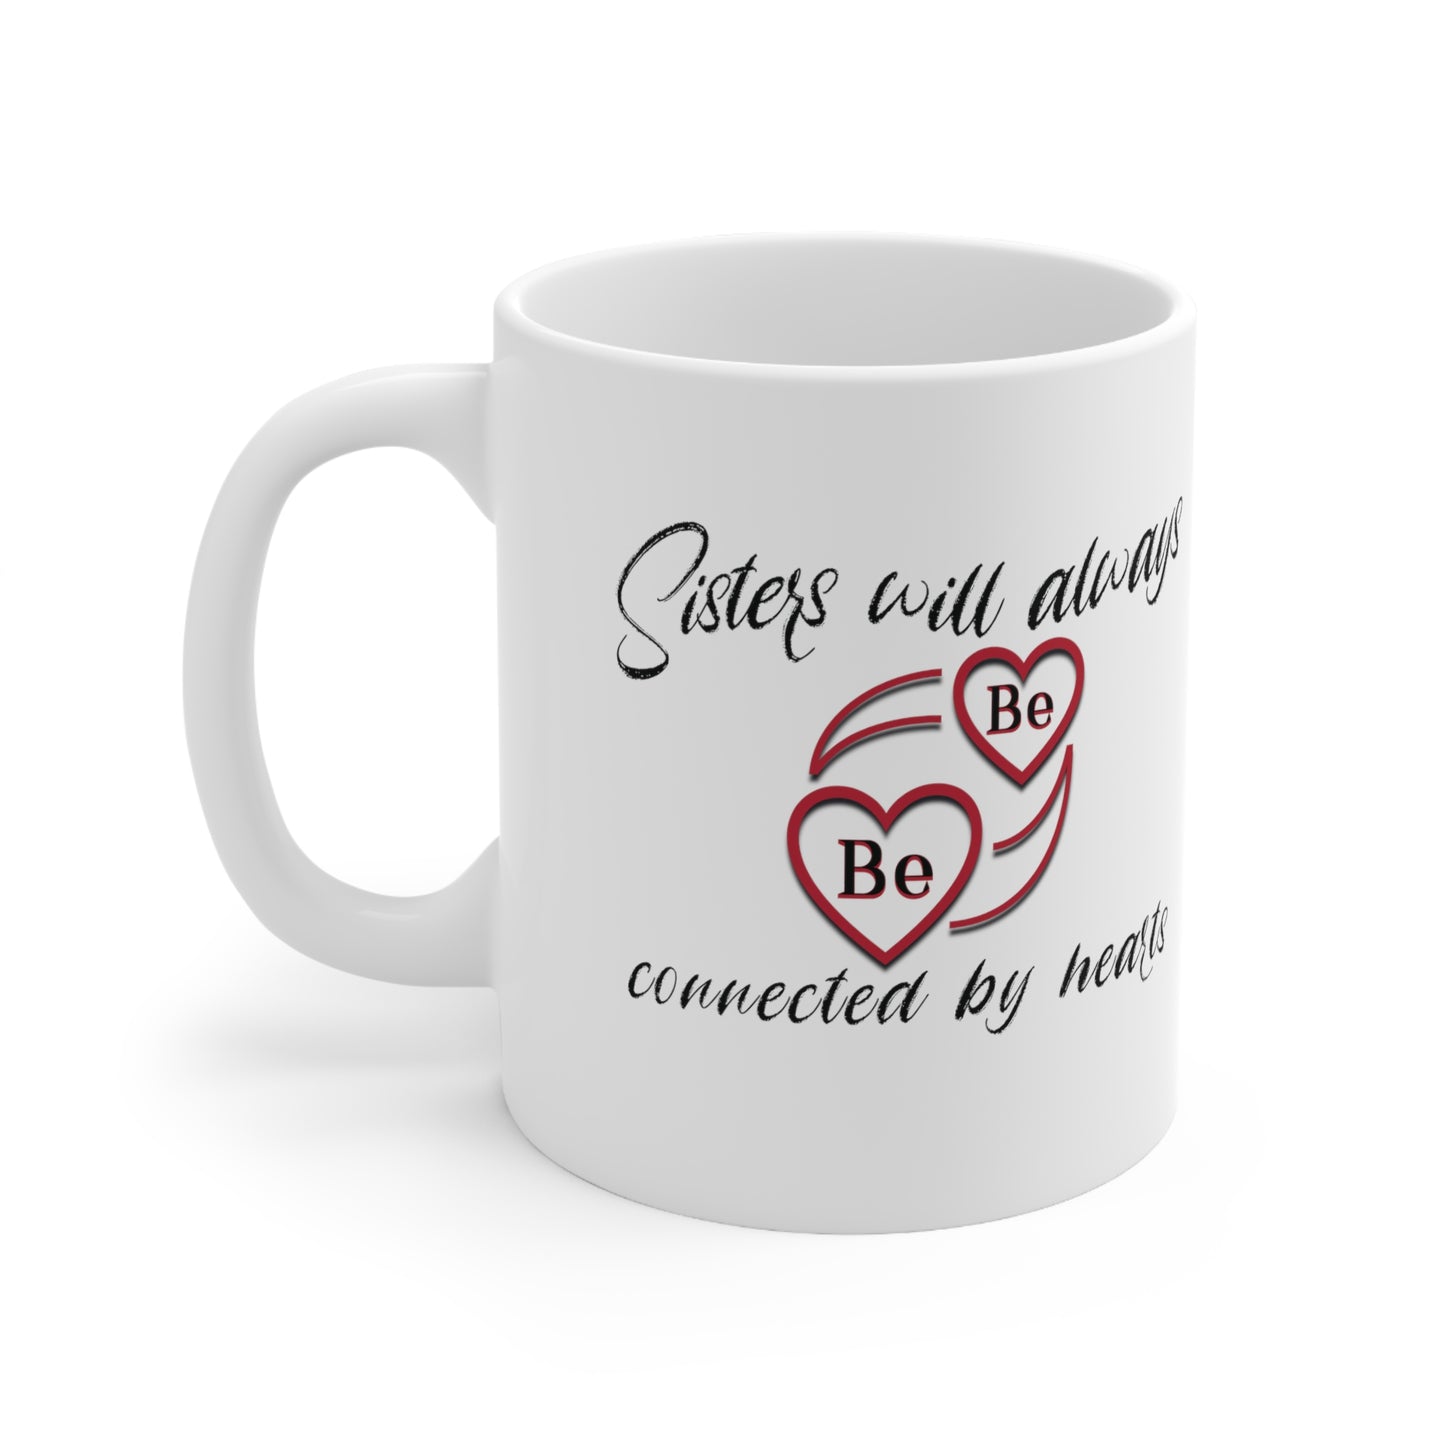 Sisters will always be connected by hearts - Ceramic Mug 11oz